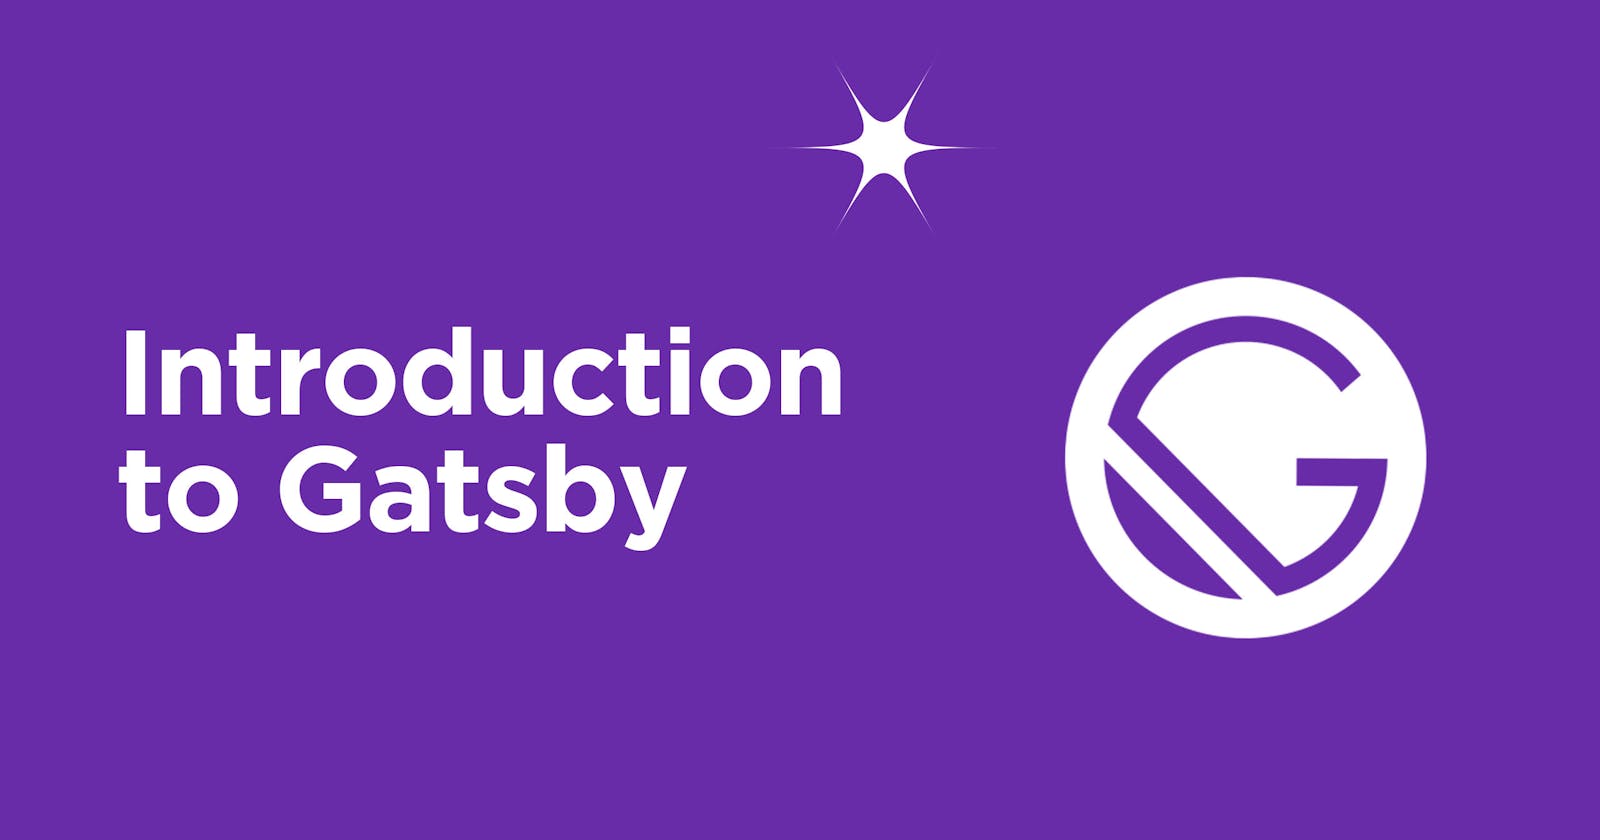 What is Gatsby? Introduction within 30 seconds